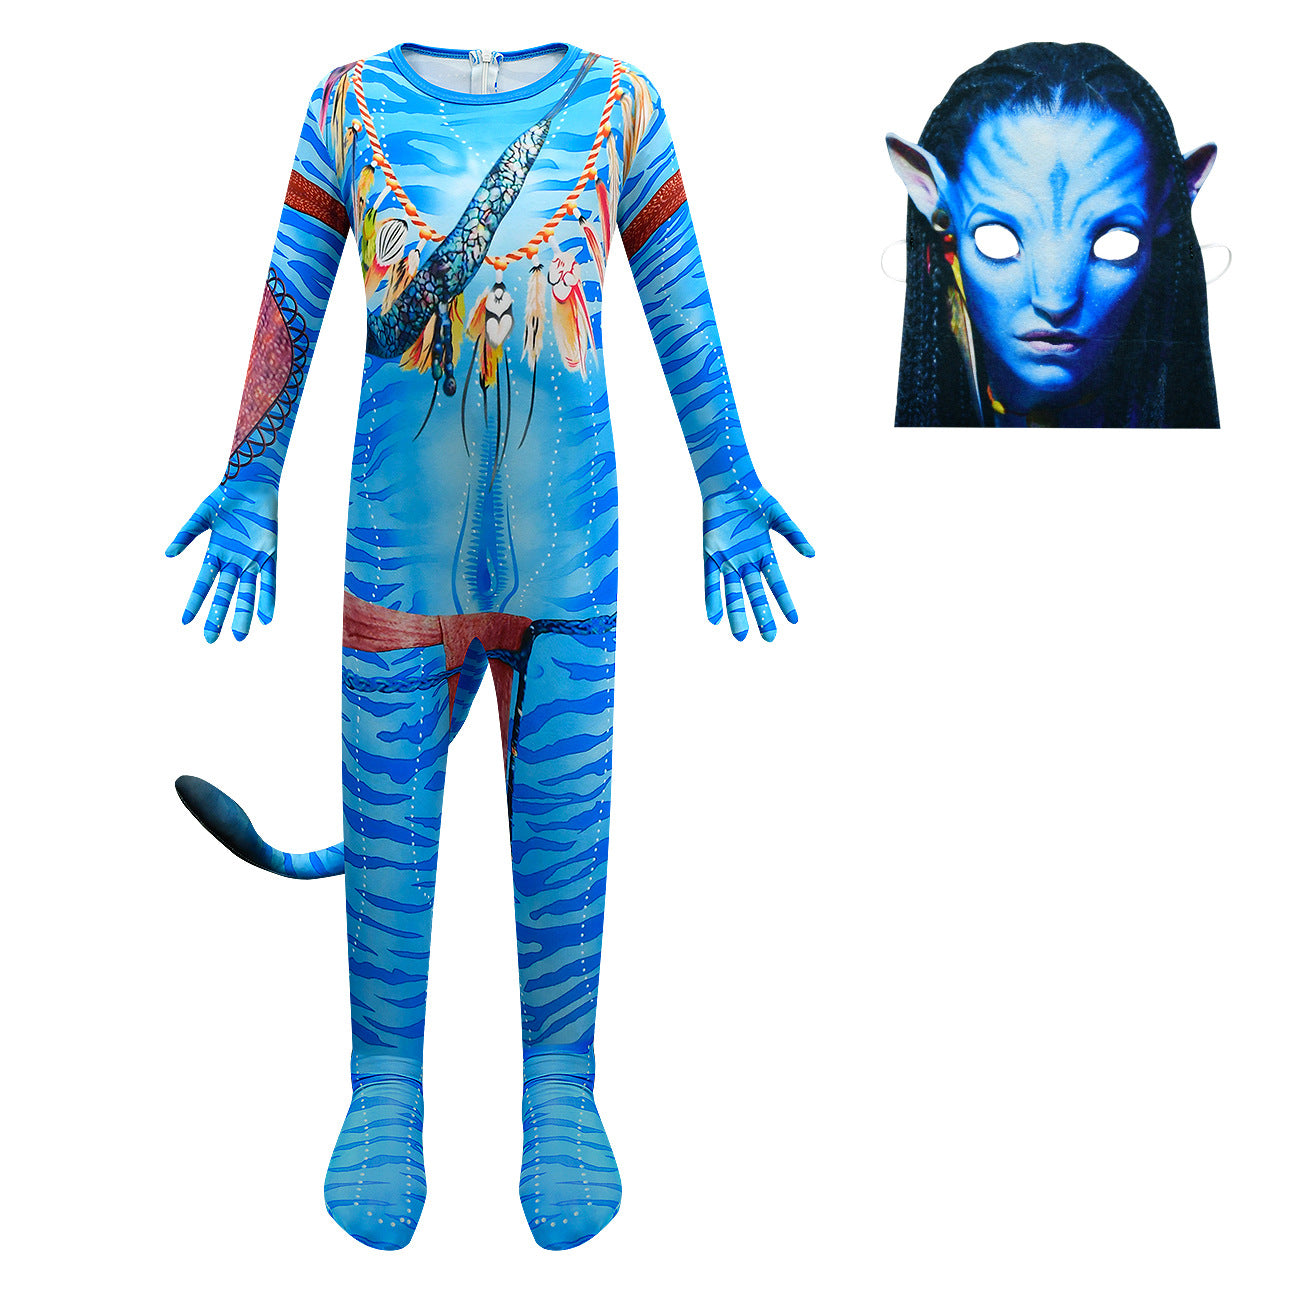 Avatar: The Way of Water Costume Jake Sully Cosplay zentai  jumpsuit For Kids